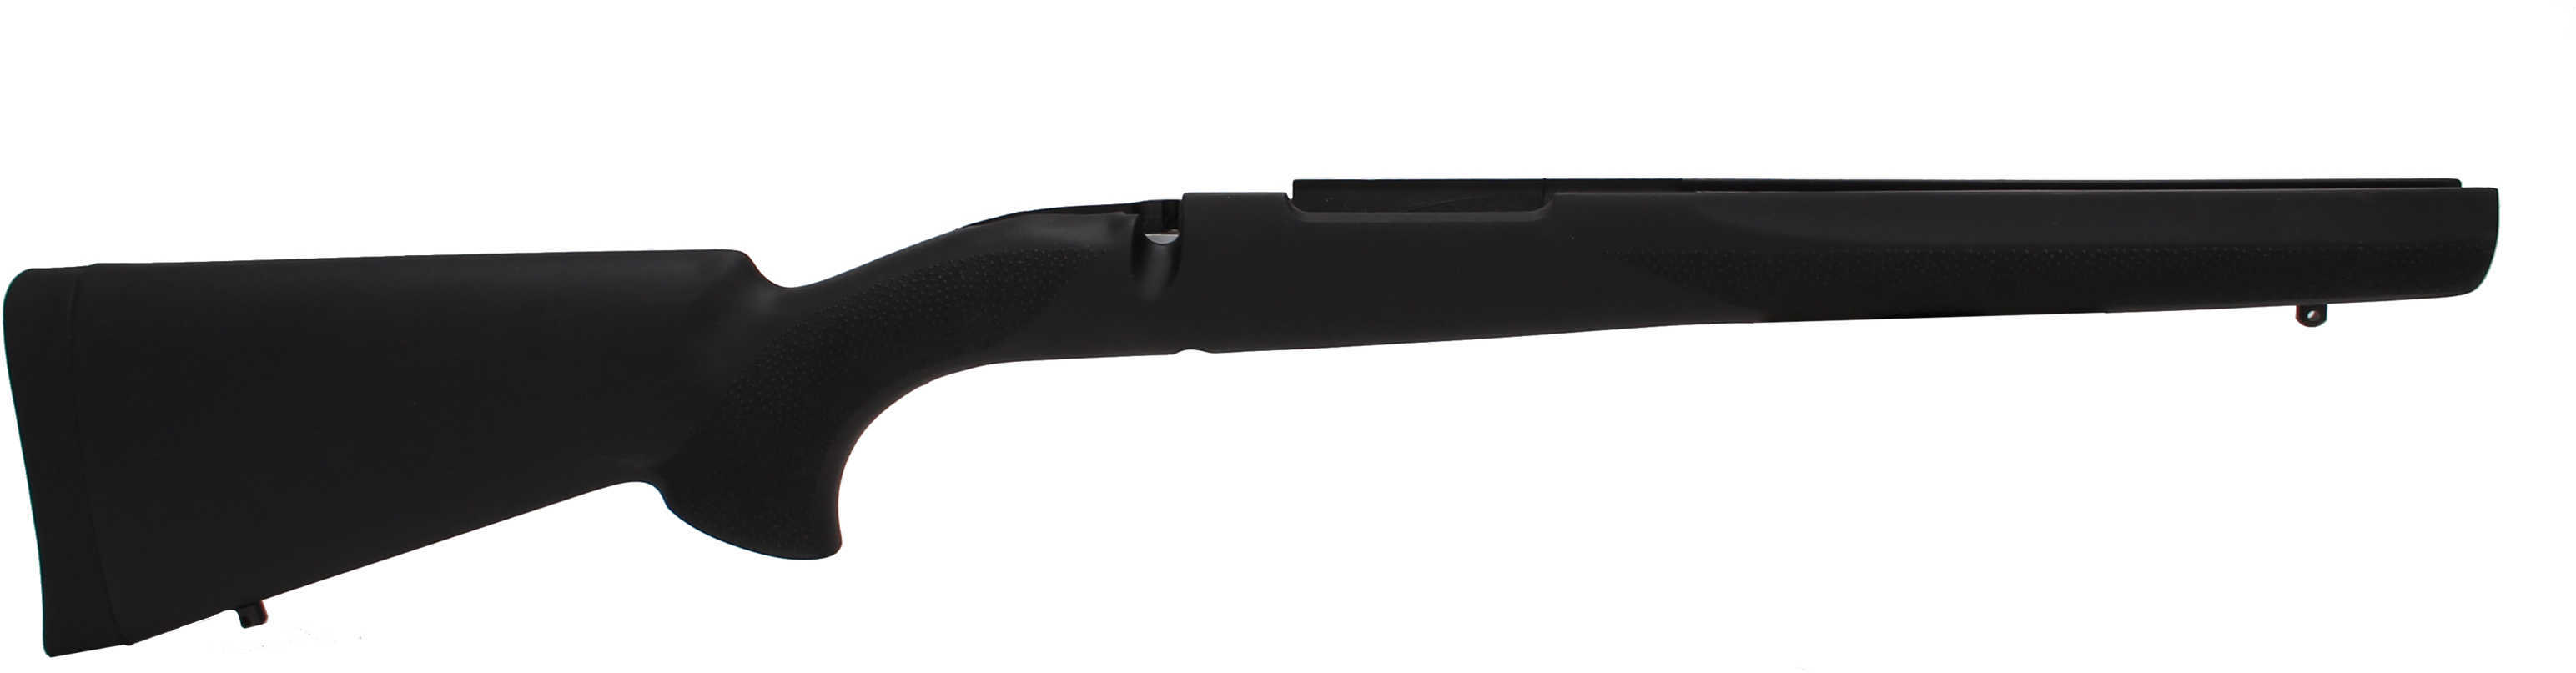 Hogue Rubber Overmolded StockMauser 98 Full BB 98002